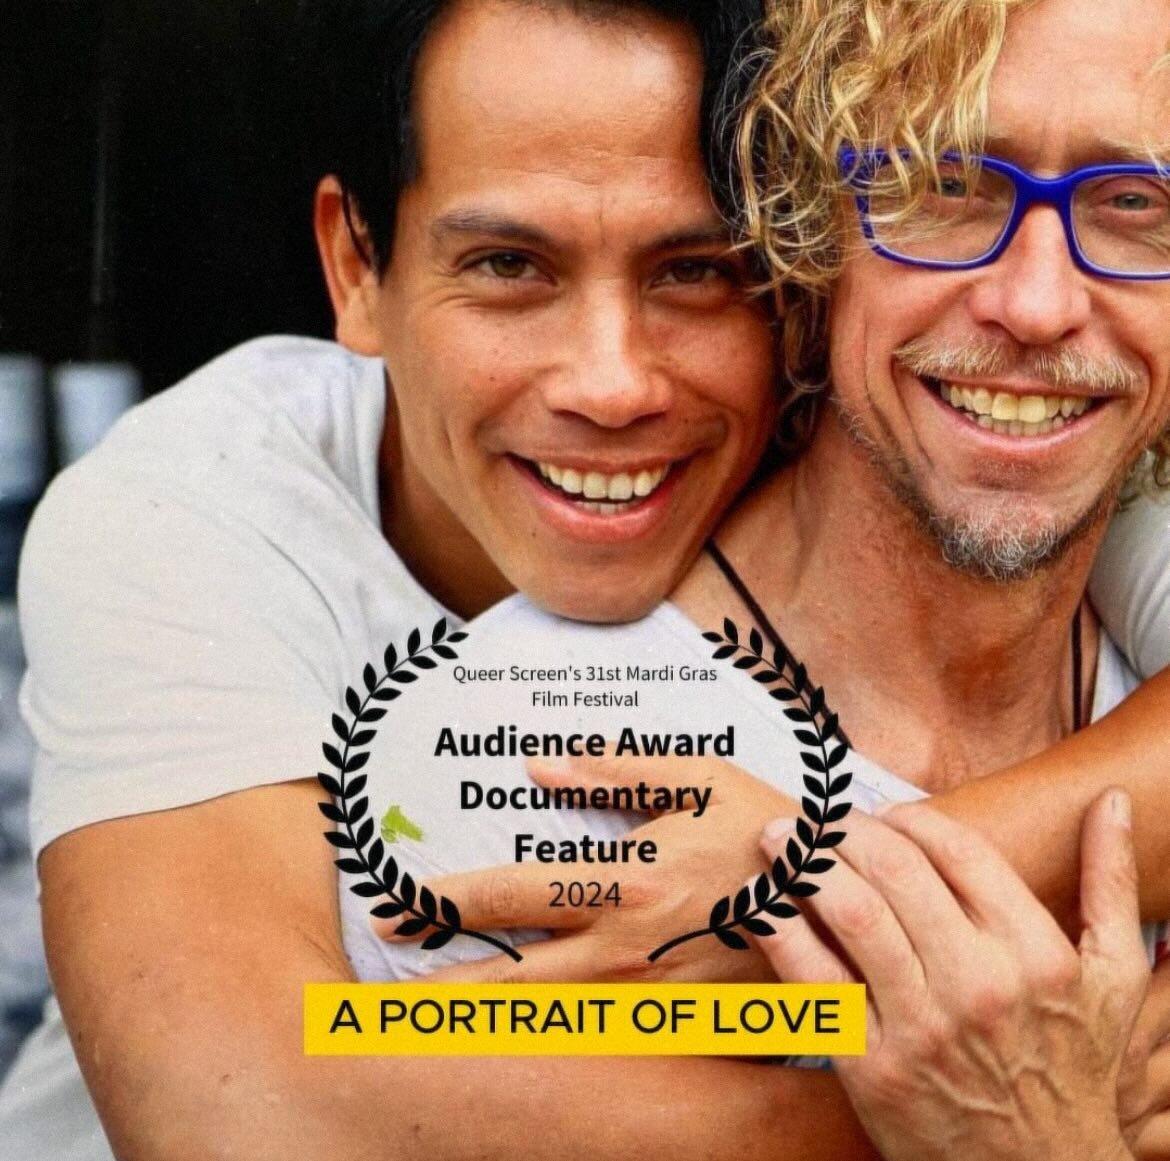 So humbly and sincere grateful that people loved the documentary &ldquo;A Portrait of Love&rdquo;

@queerscreen @robertoperu #mgff24